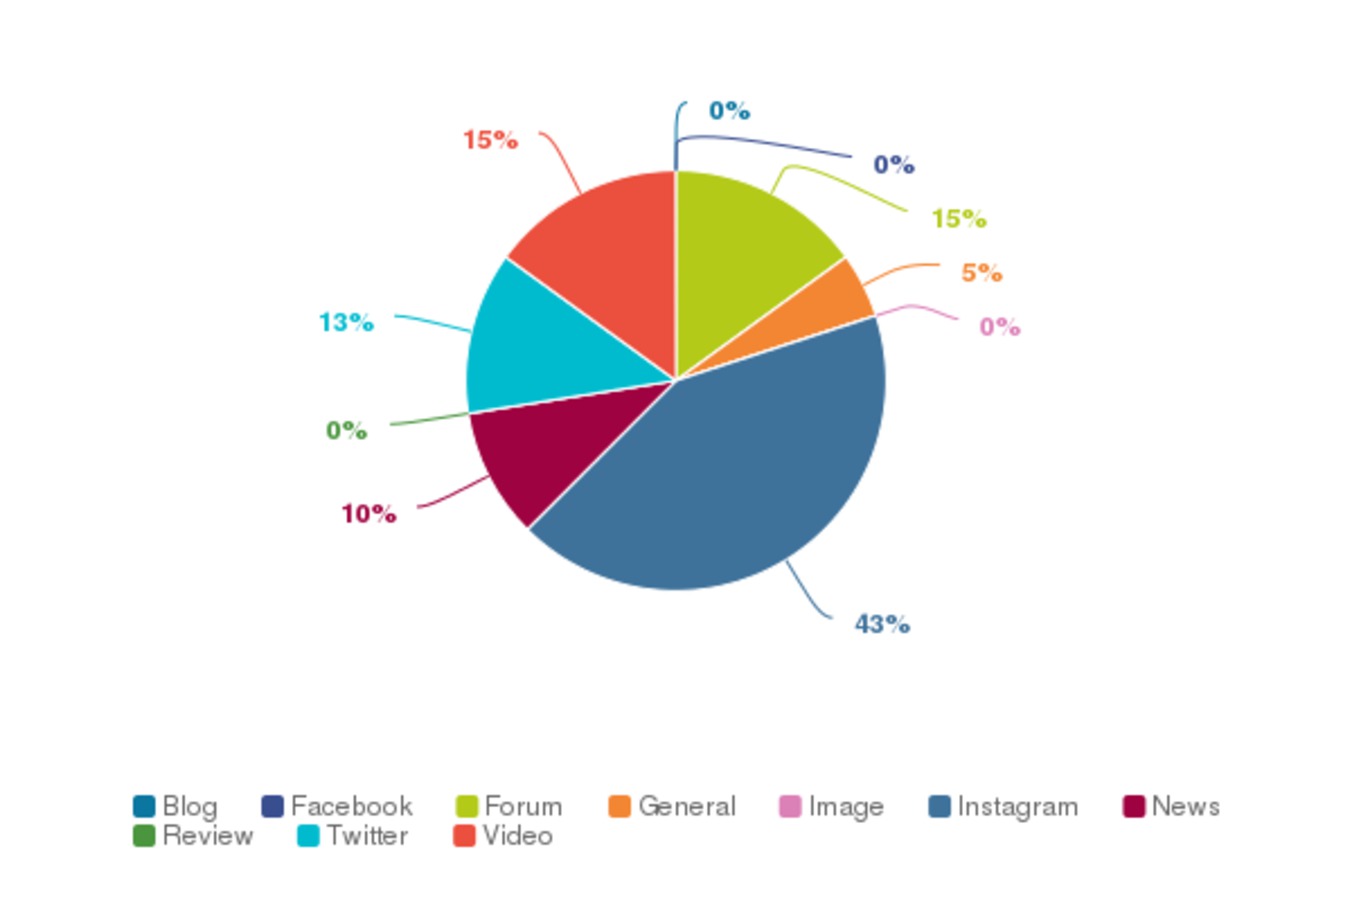 Get Social Insights – Where does your brand mentions come from